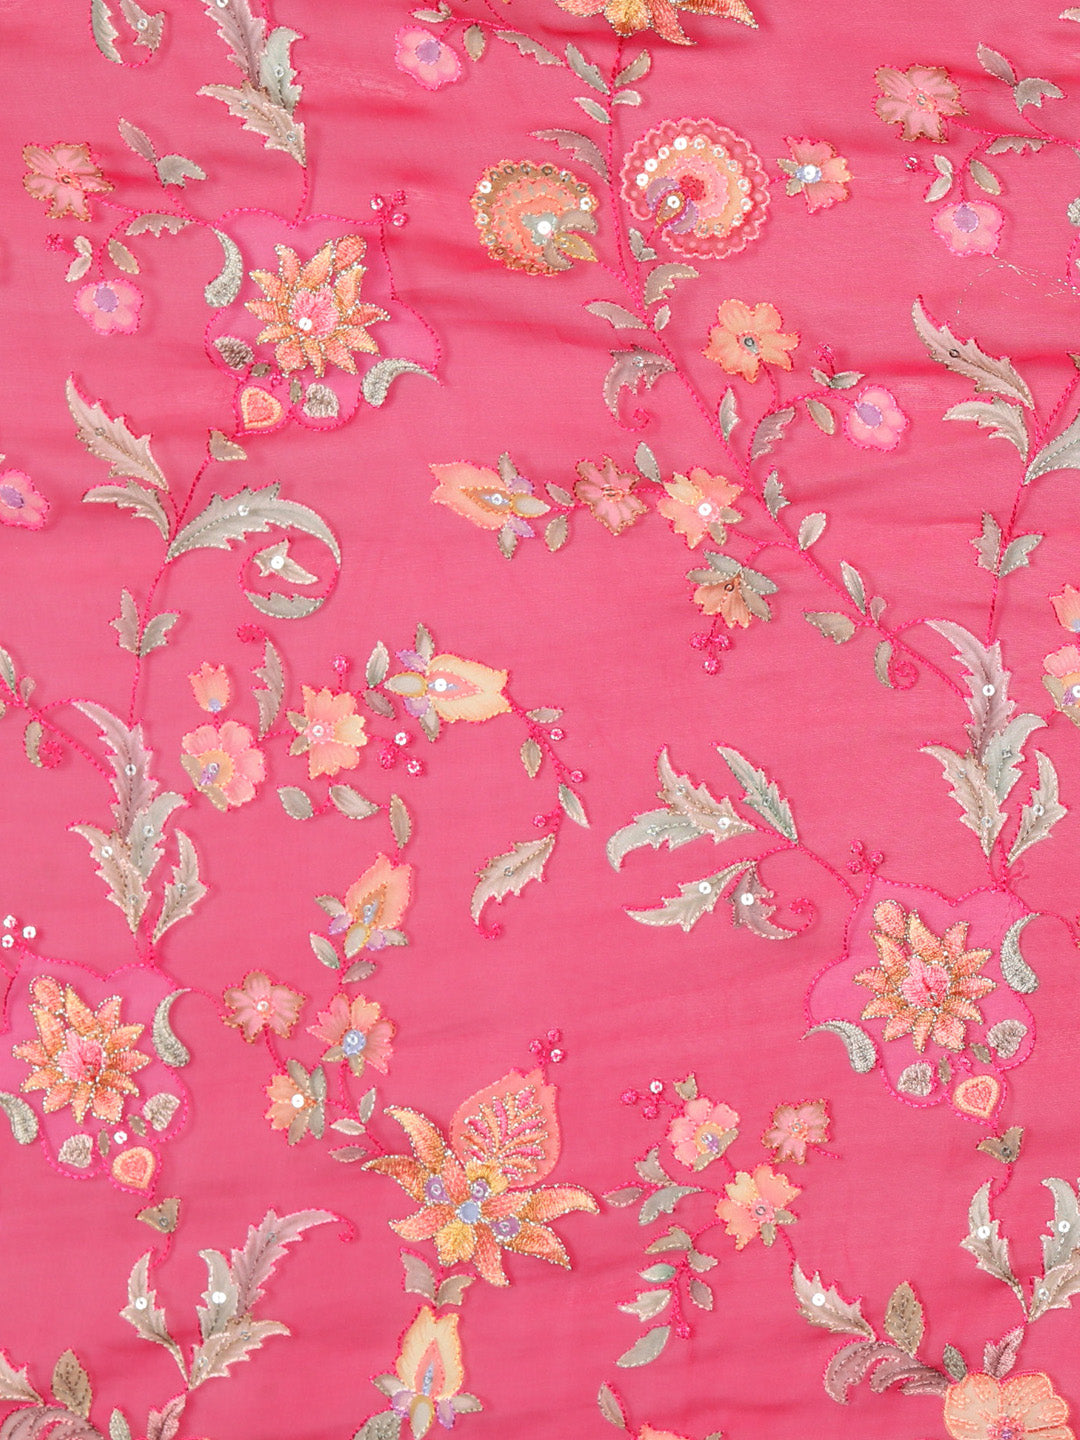 Floral Embroidered Rani Pink Organza With Golden Resham